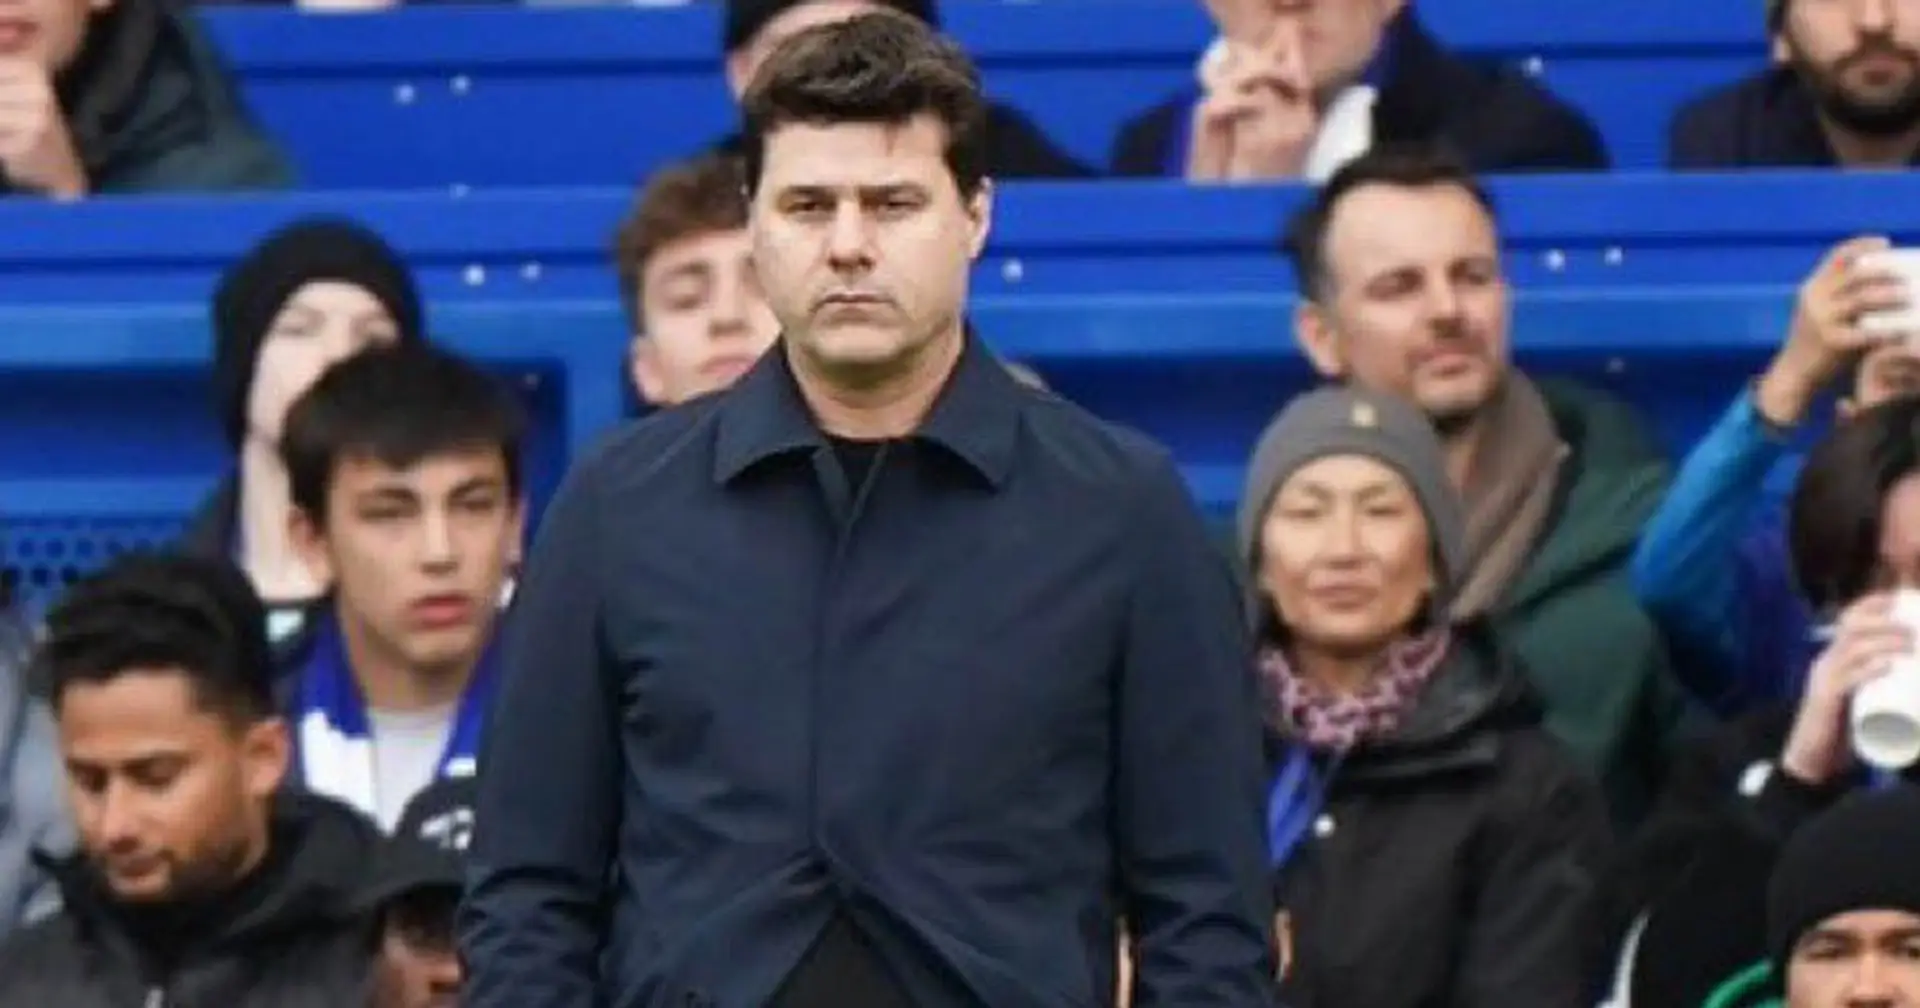 Wolves fans mock Poch with brutal jibe after taking 3-1 lead - Chelsea supporters reply with their own chant